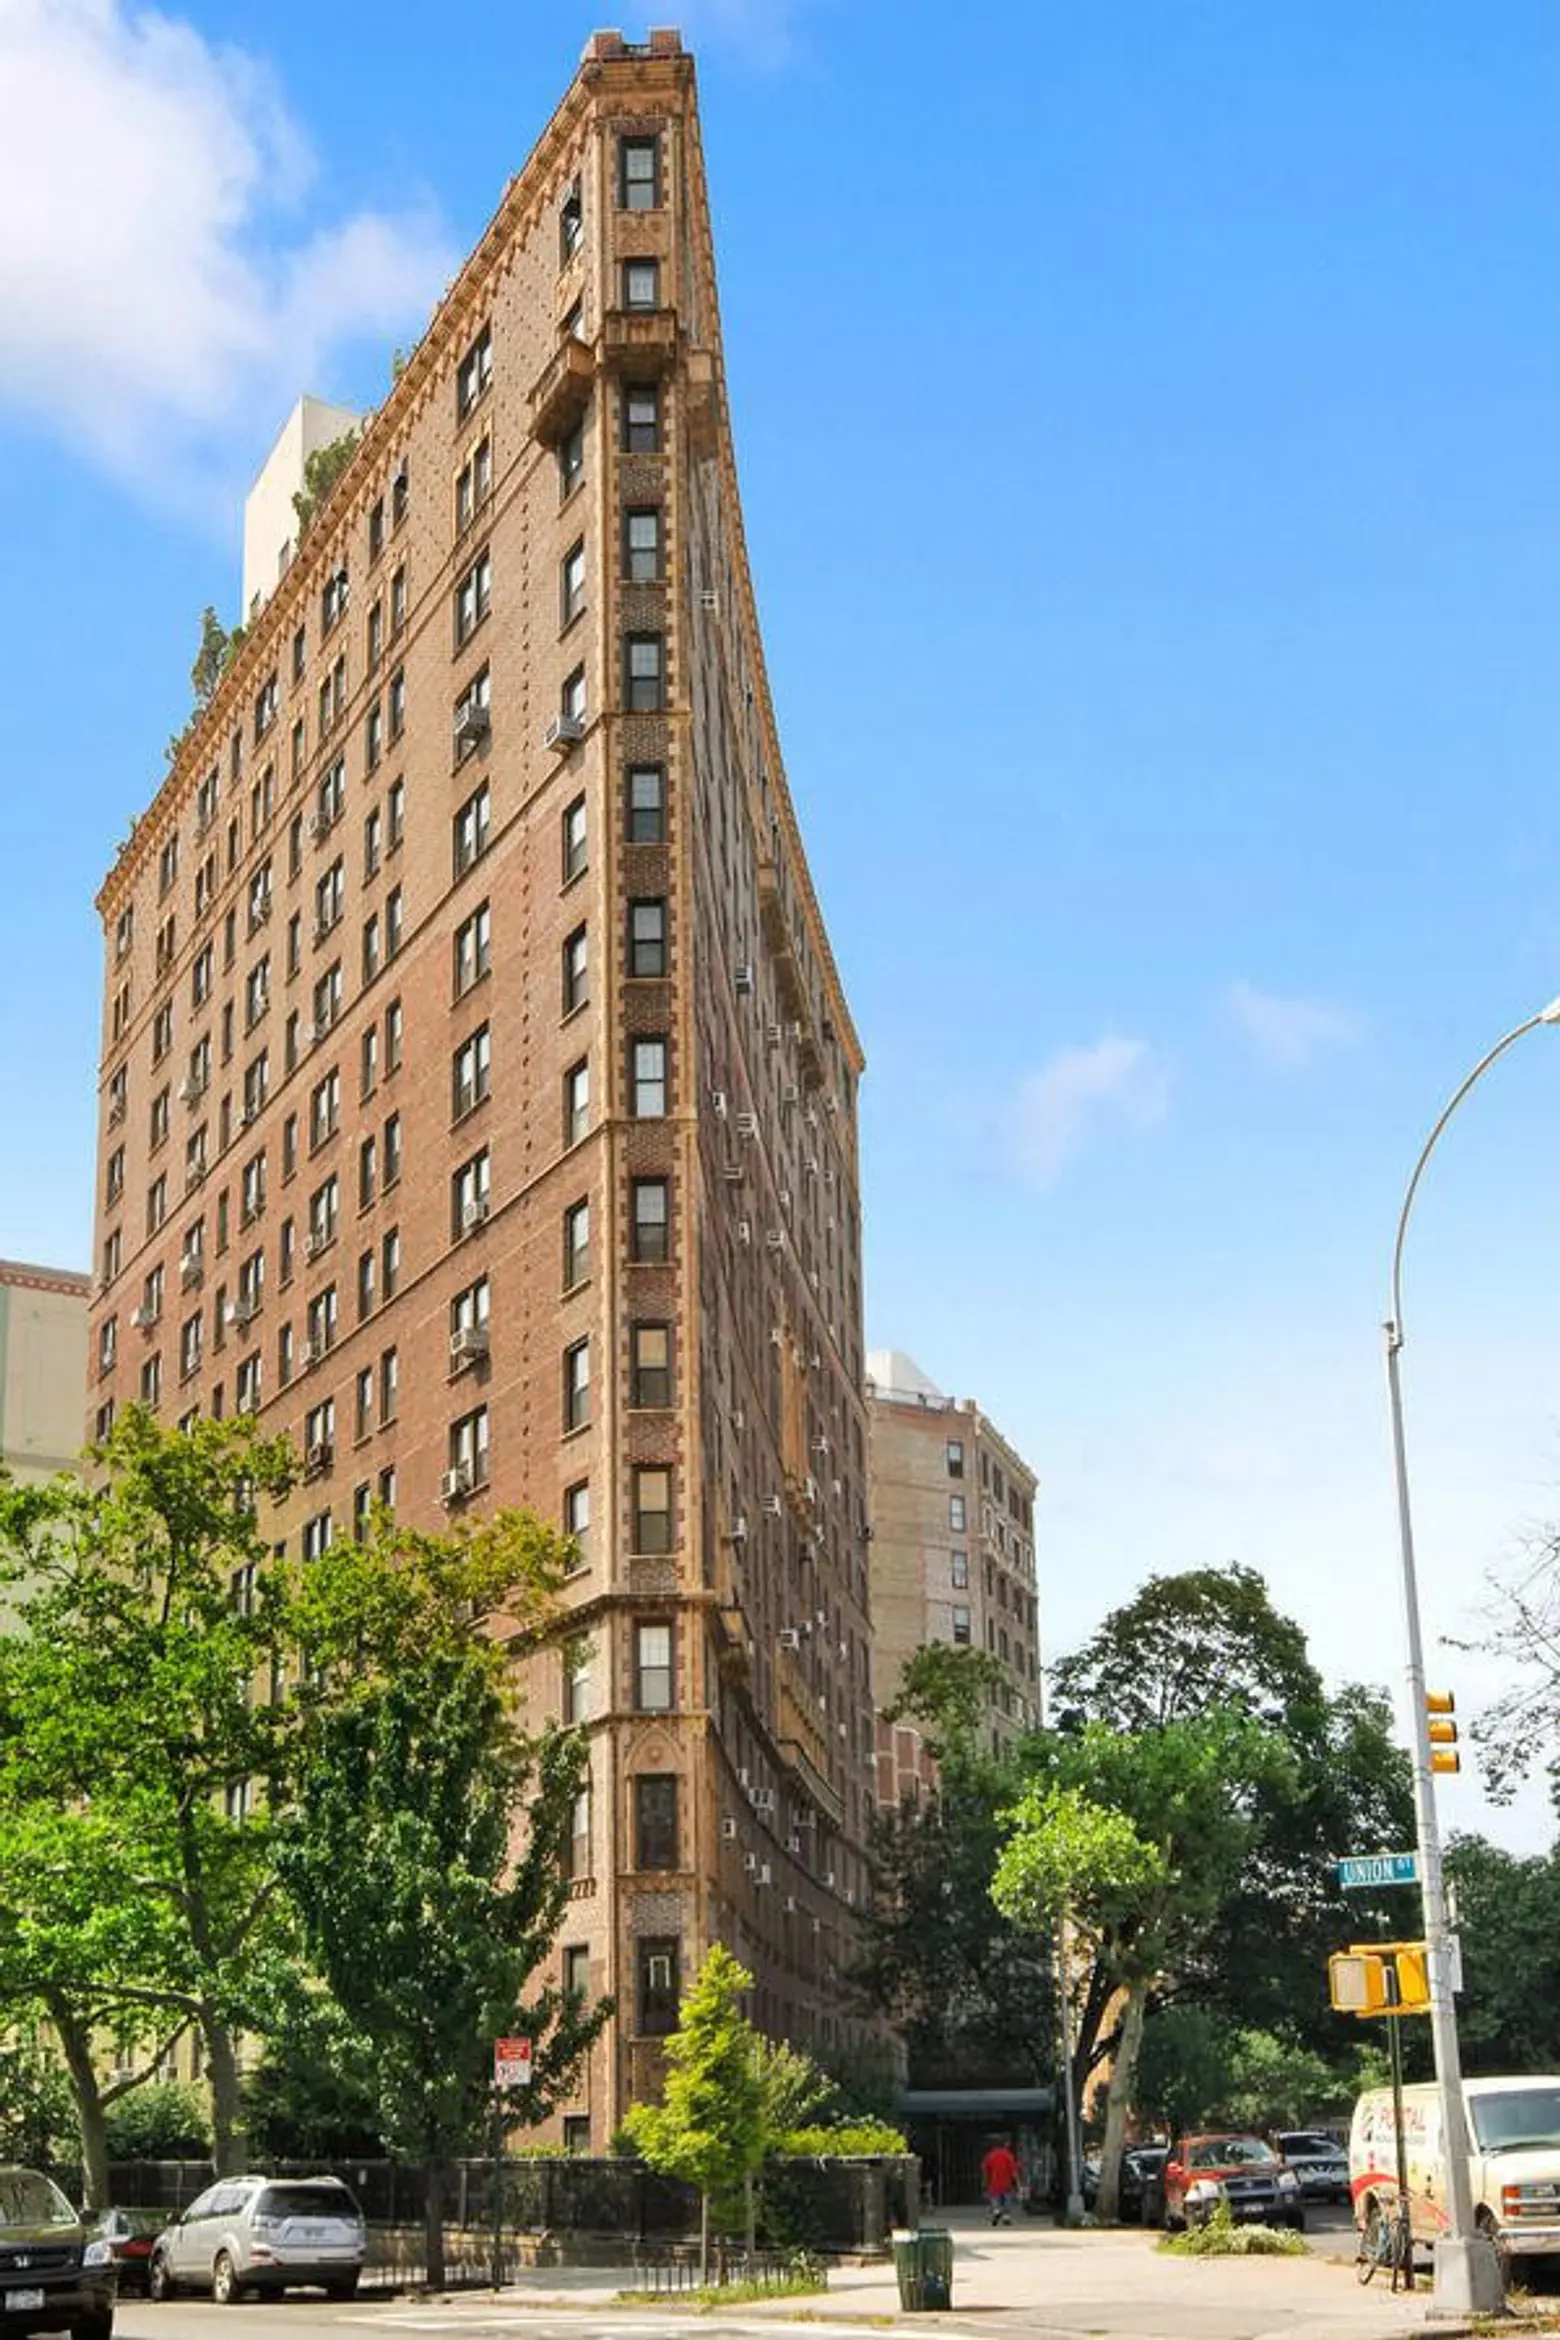 47 Plaza Street West, Rosario Candela, Cool listing, classic seven, Brooklyn Real Estate, Brooklyn Coop for sale, cool listings, prewar, deco buidlings, residential architecture, grand army plaza, prospect park, Flatiron Buidling